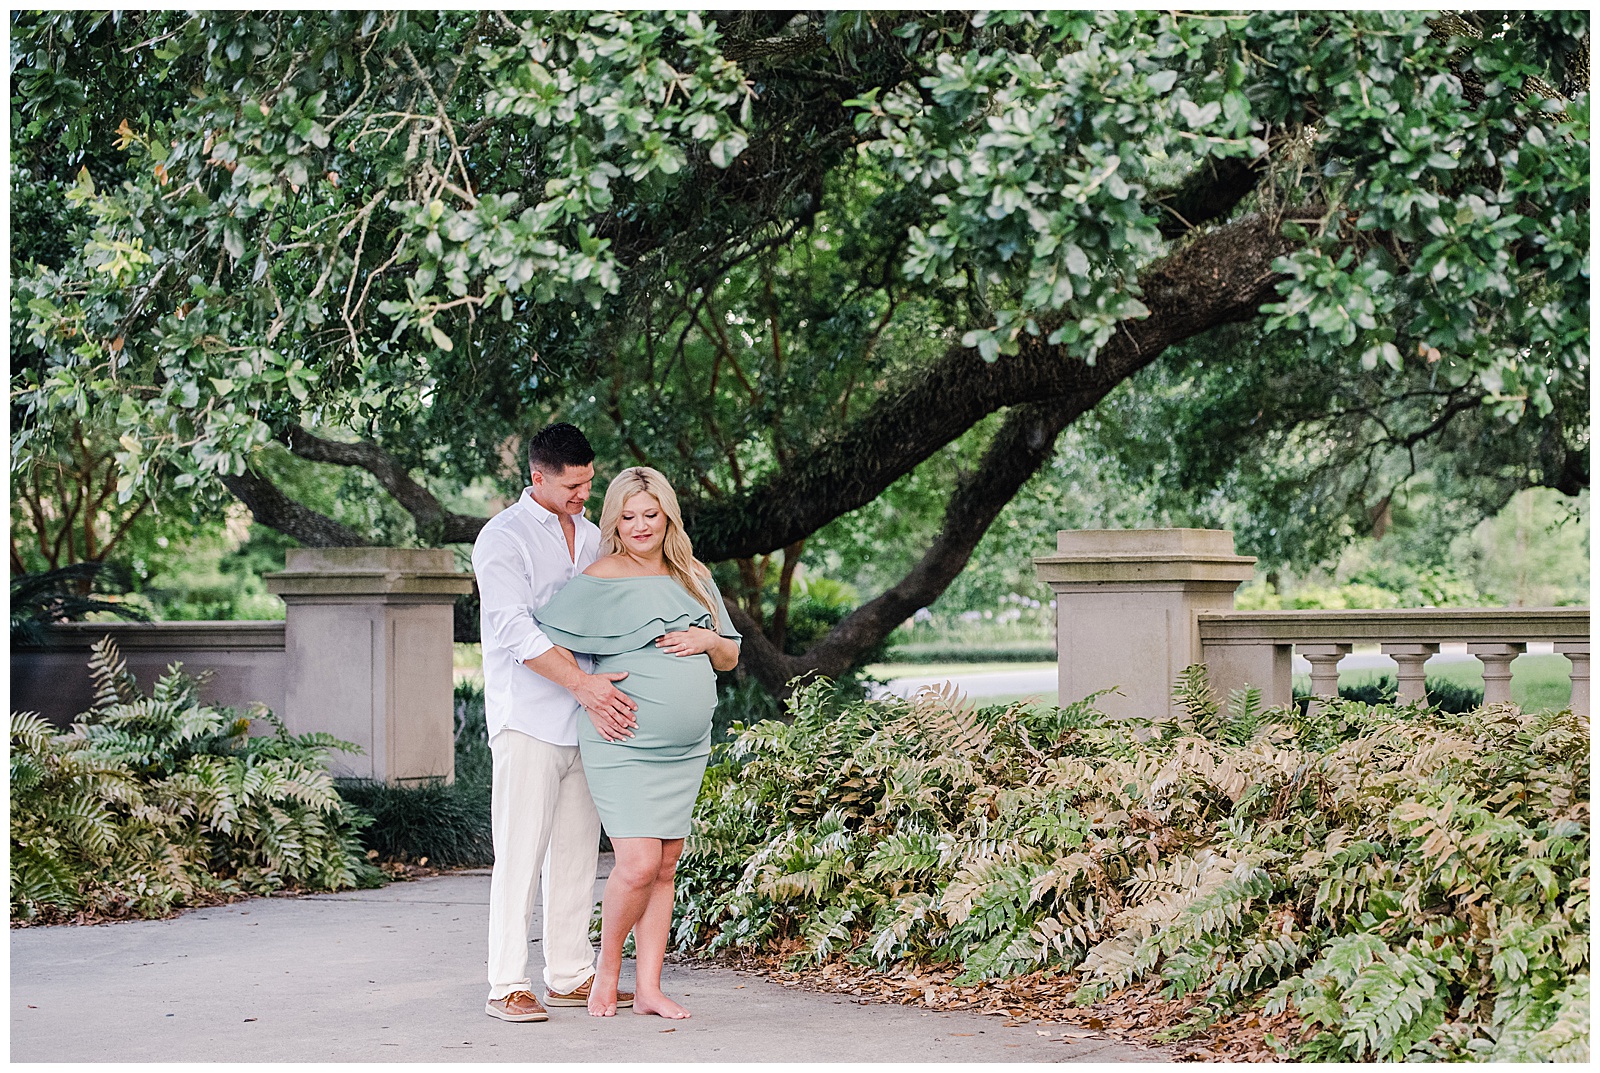 New Orleans Maternity Photographer Chelsea Rousey Photography pregnant mom with dad walking in park in new orleans